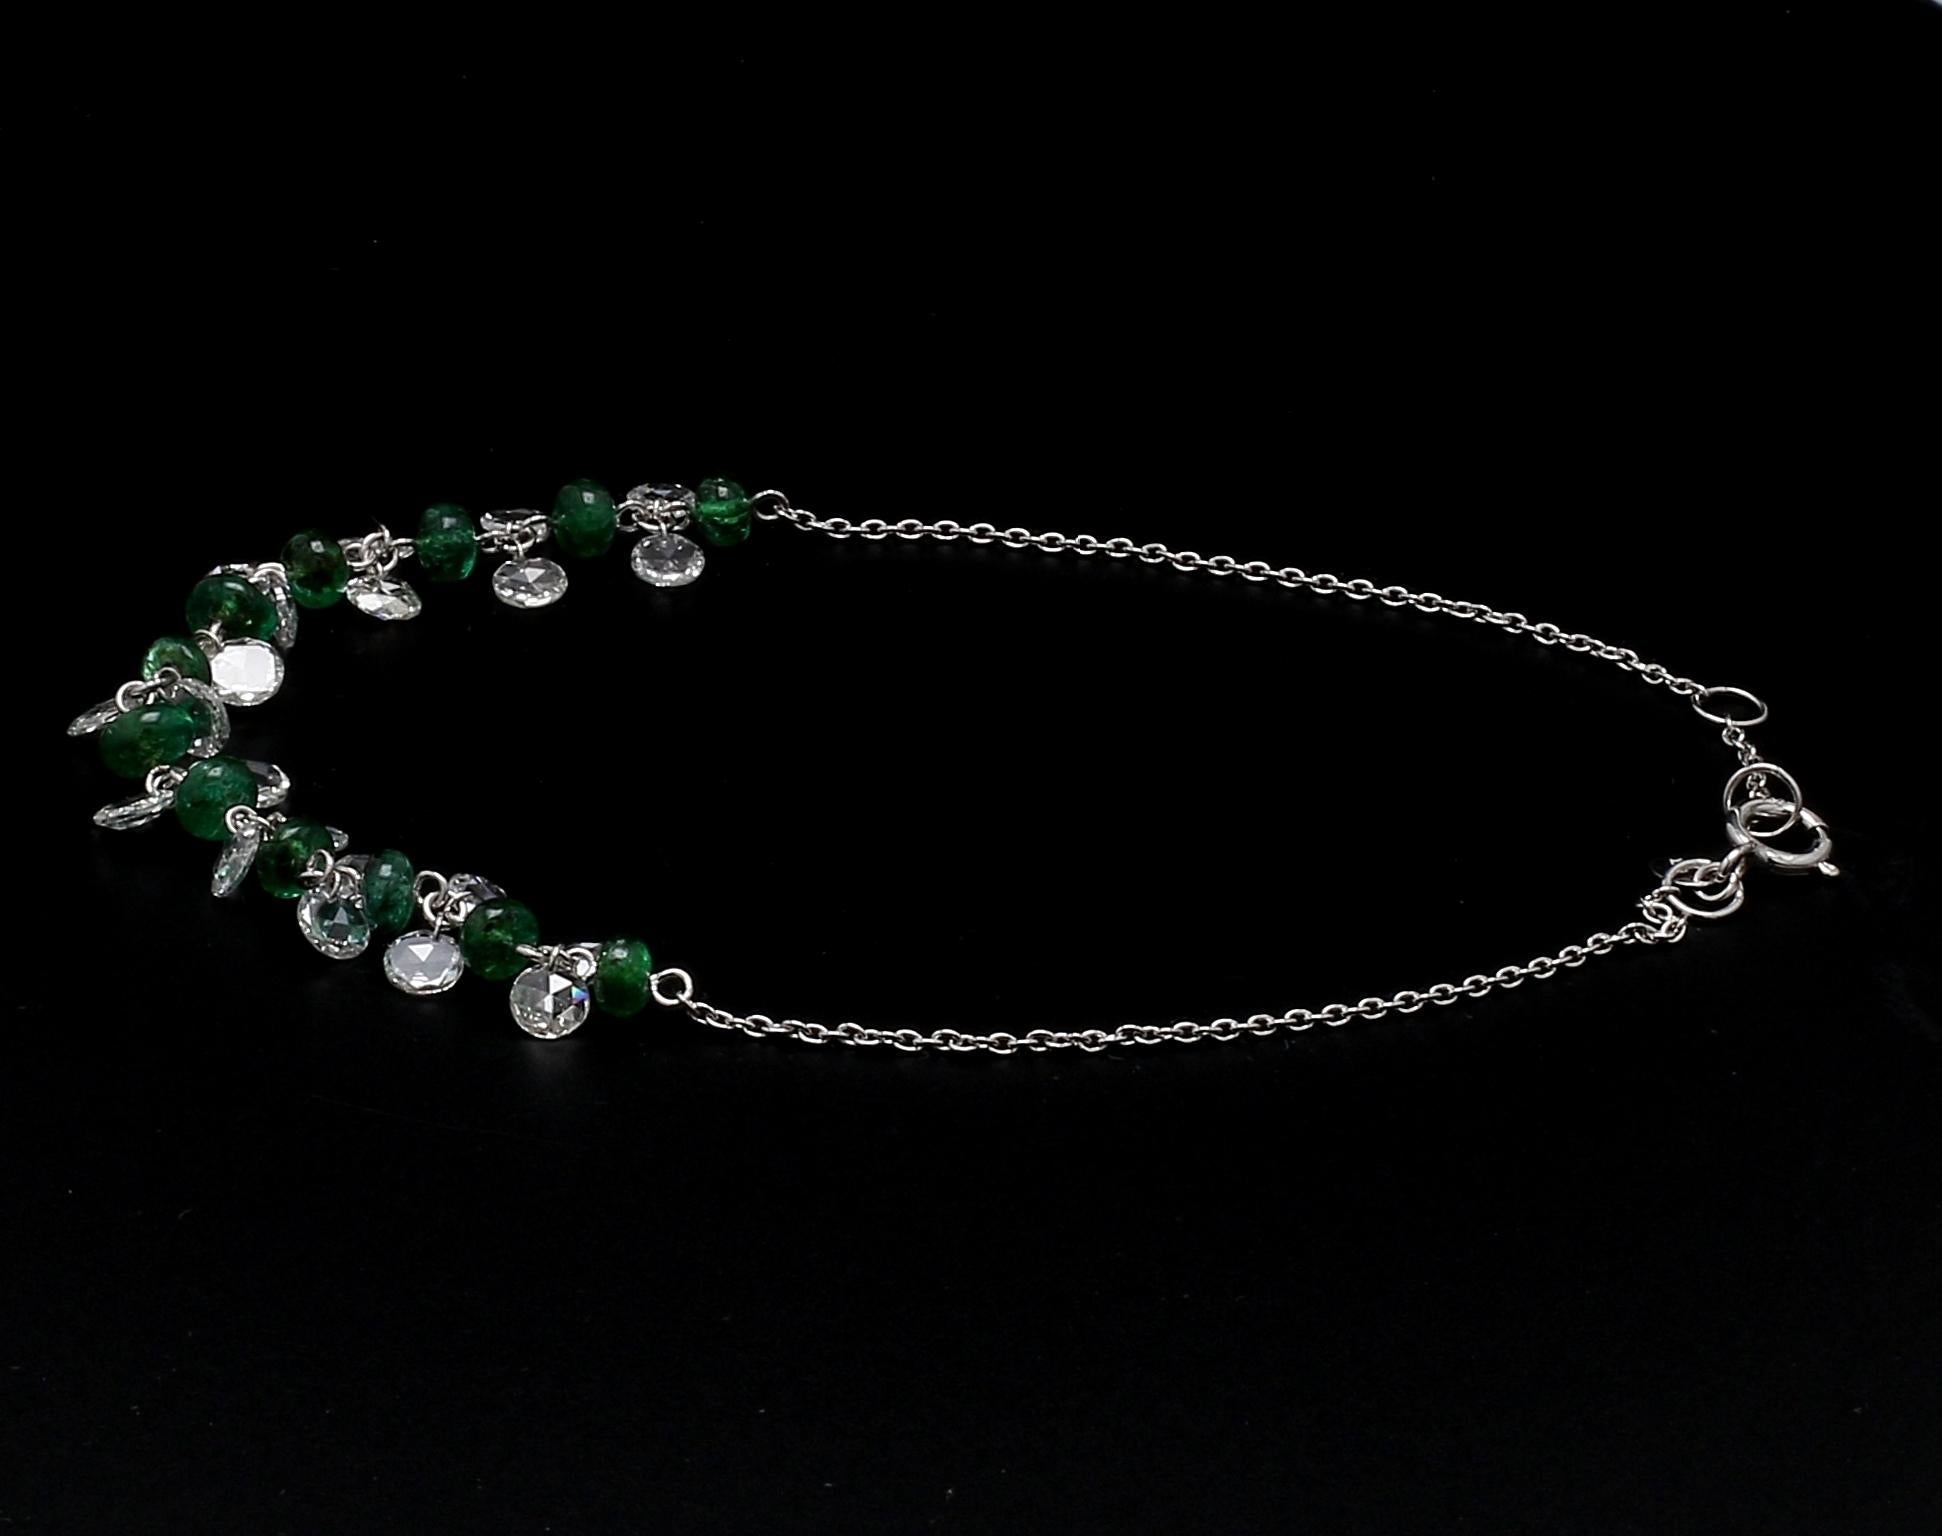 Panim Rose Cut Diamond And Emerald Dangling Bracelet in 18 Karat White Gold

Our dangling rose-cut diamond bracelet is extremely wearable. Its versatility and classic design make it a great accompaniment to various occasions. Beautifully made with